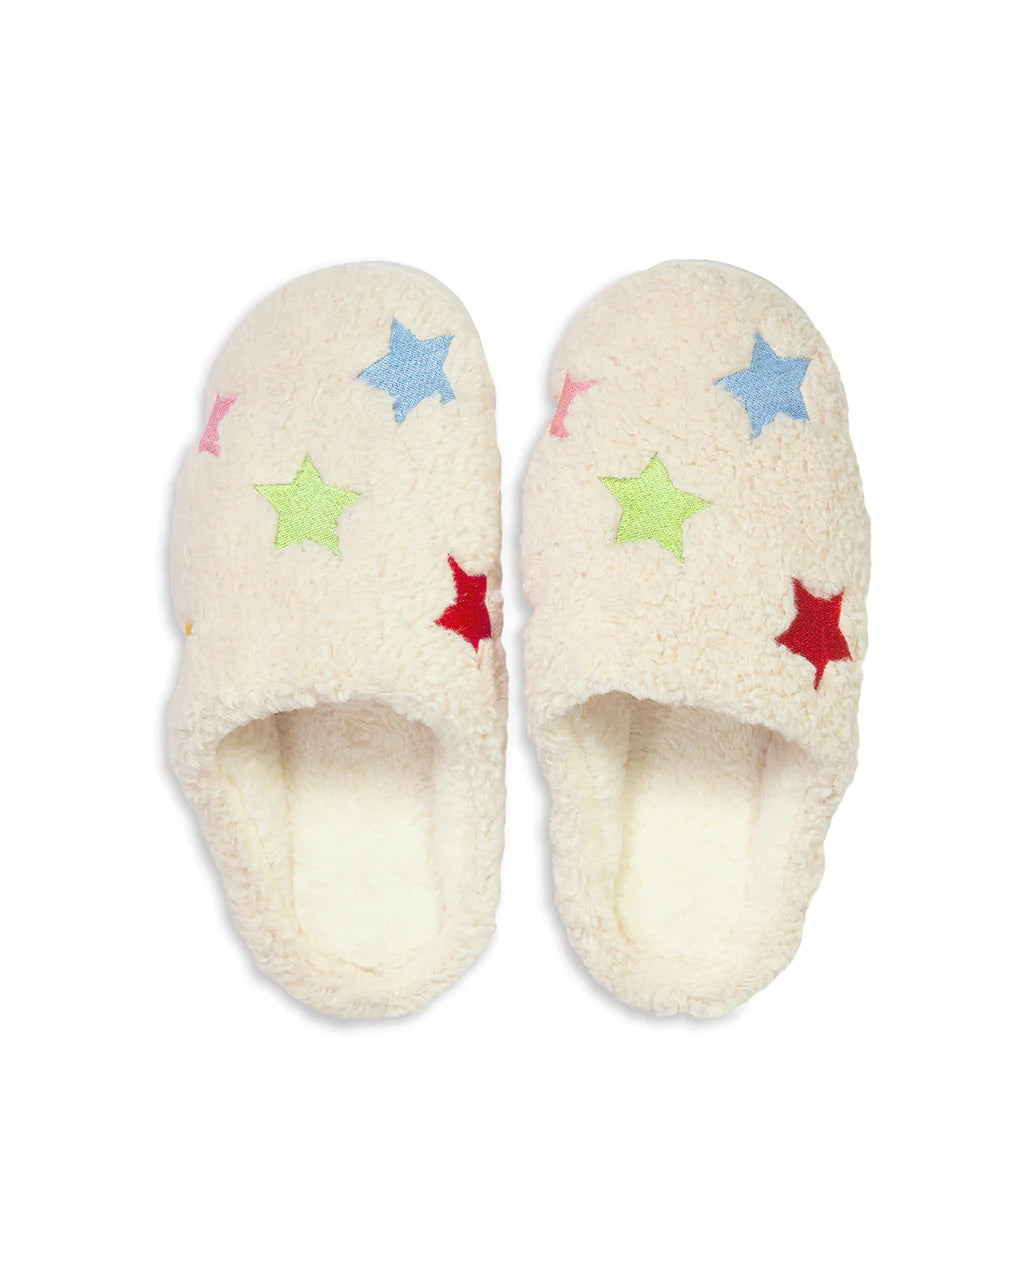 Ban.do Cozy Slippers, Stars